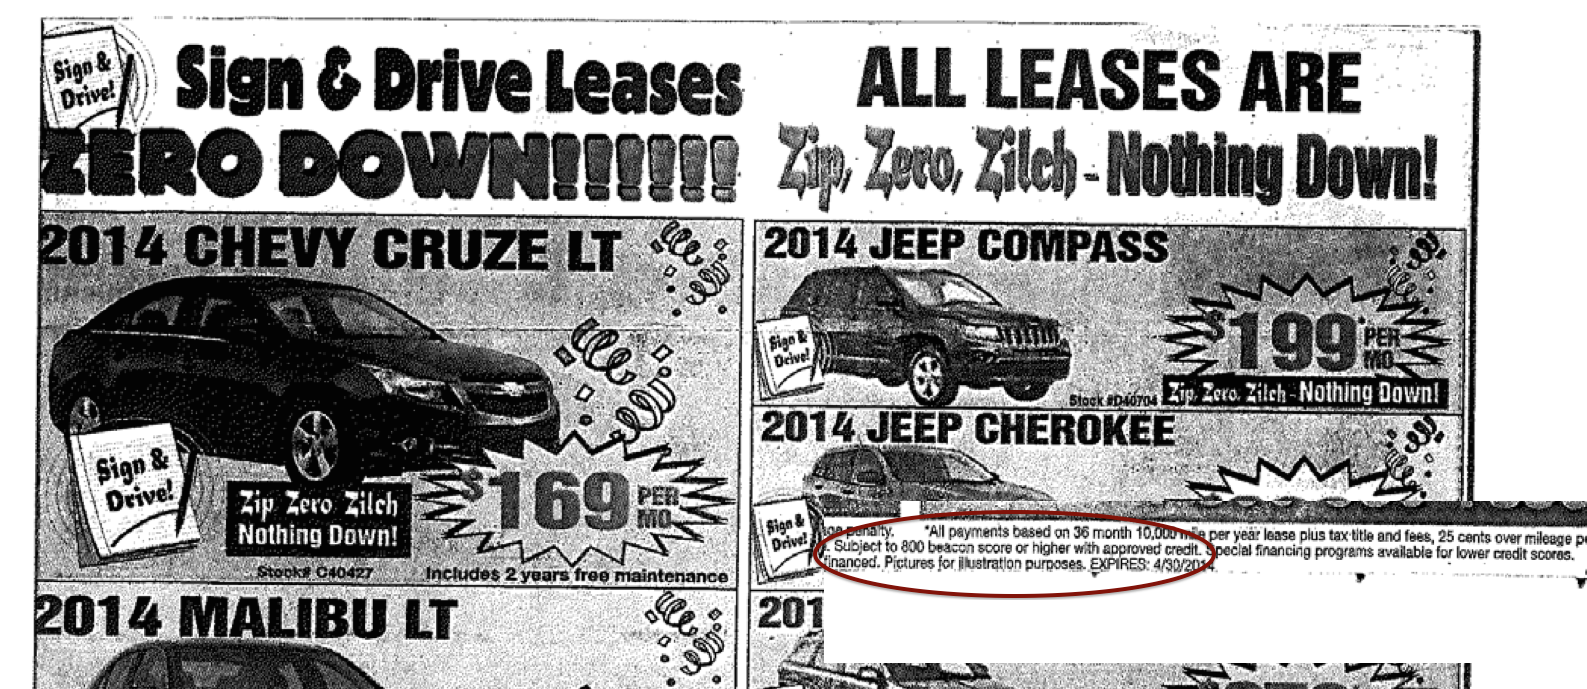 Car Dealers Can’t Scream “Zero Down On All Leases” If Most Buyers Won’t Qualify For Deal